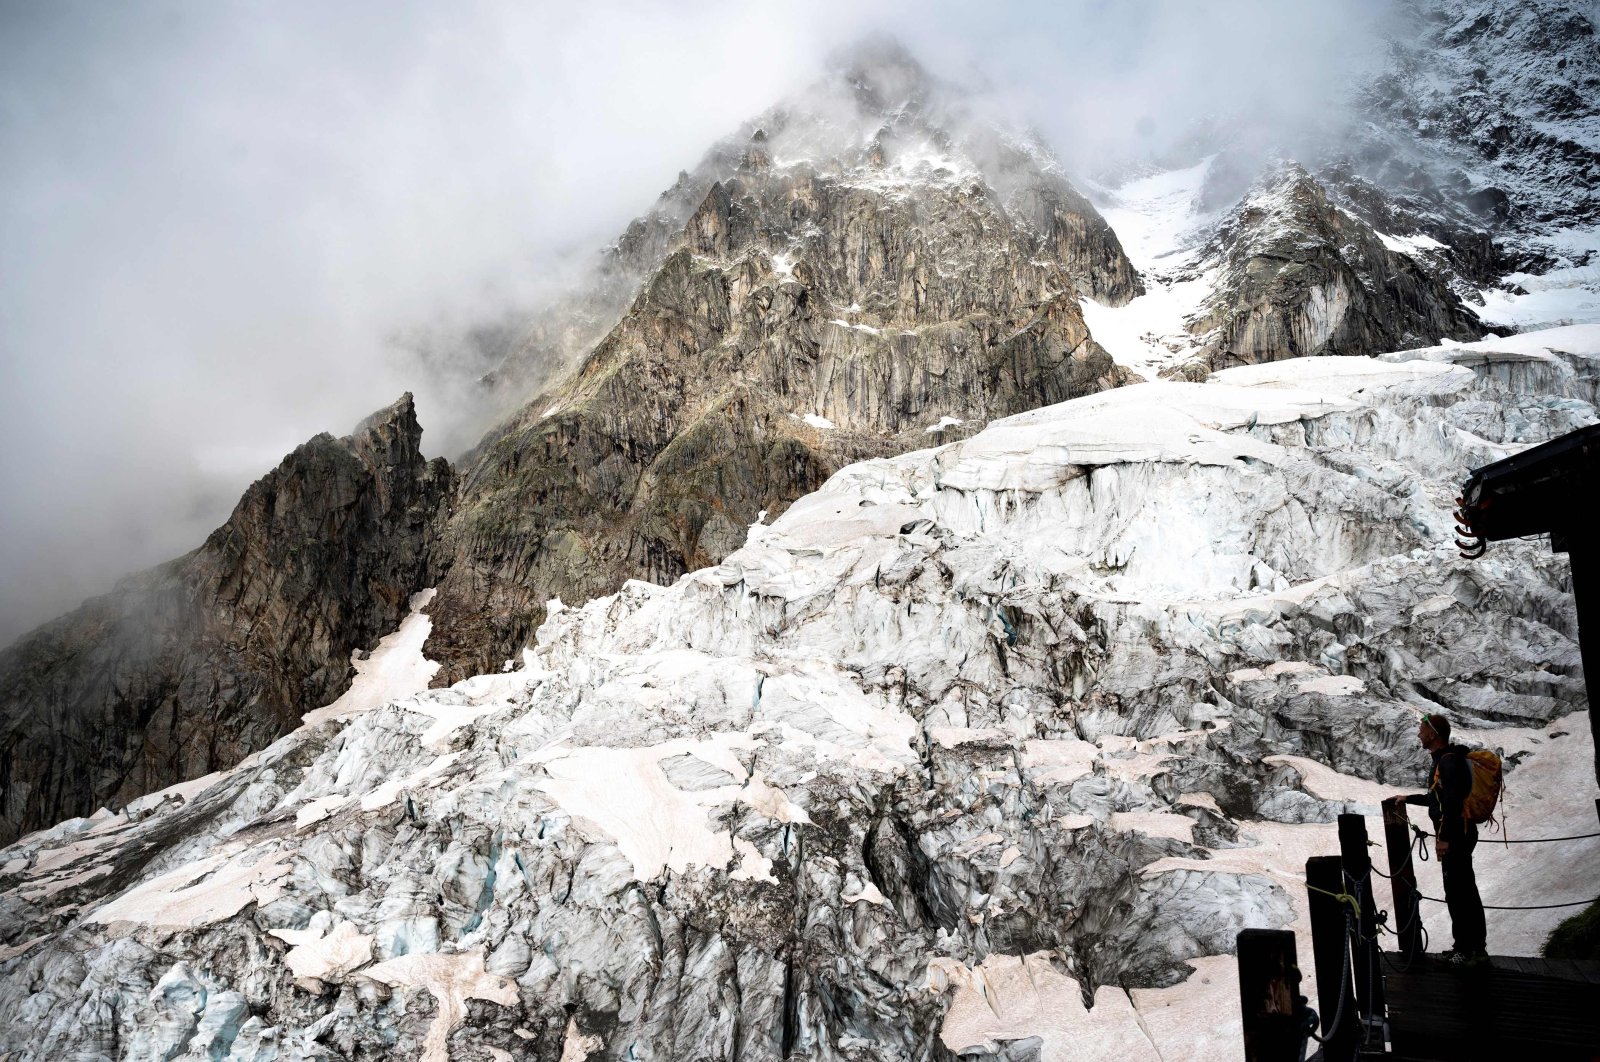 An alpinist stands on the balcony of the Boccalatte Hut on the Planpincieux Glacier in Courmayeur, Alps Region, north-western Italy, Aug. 5, 2021. (AFP Photo)